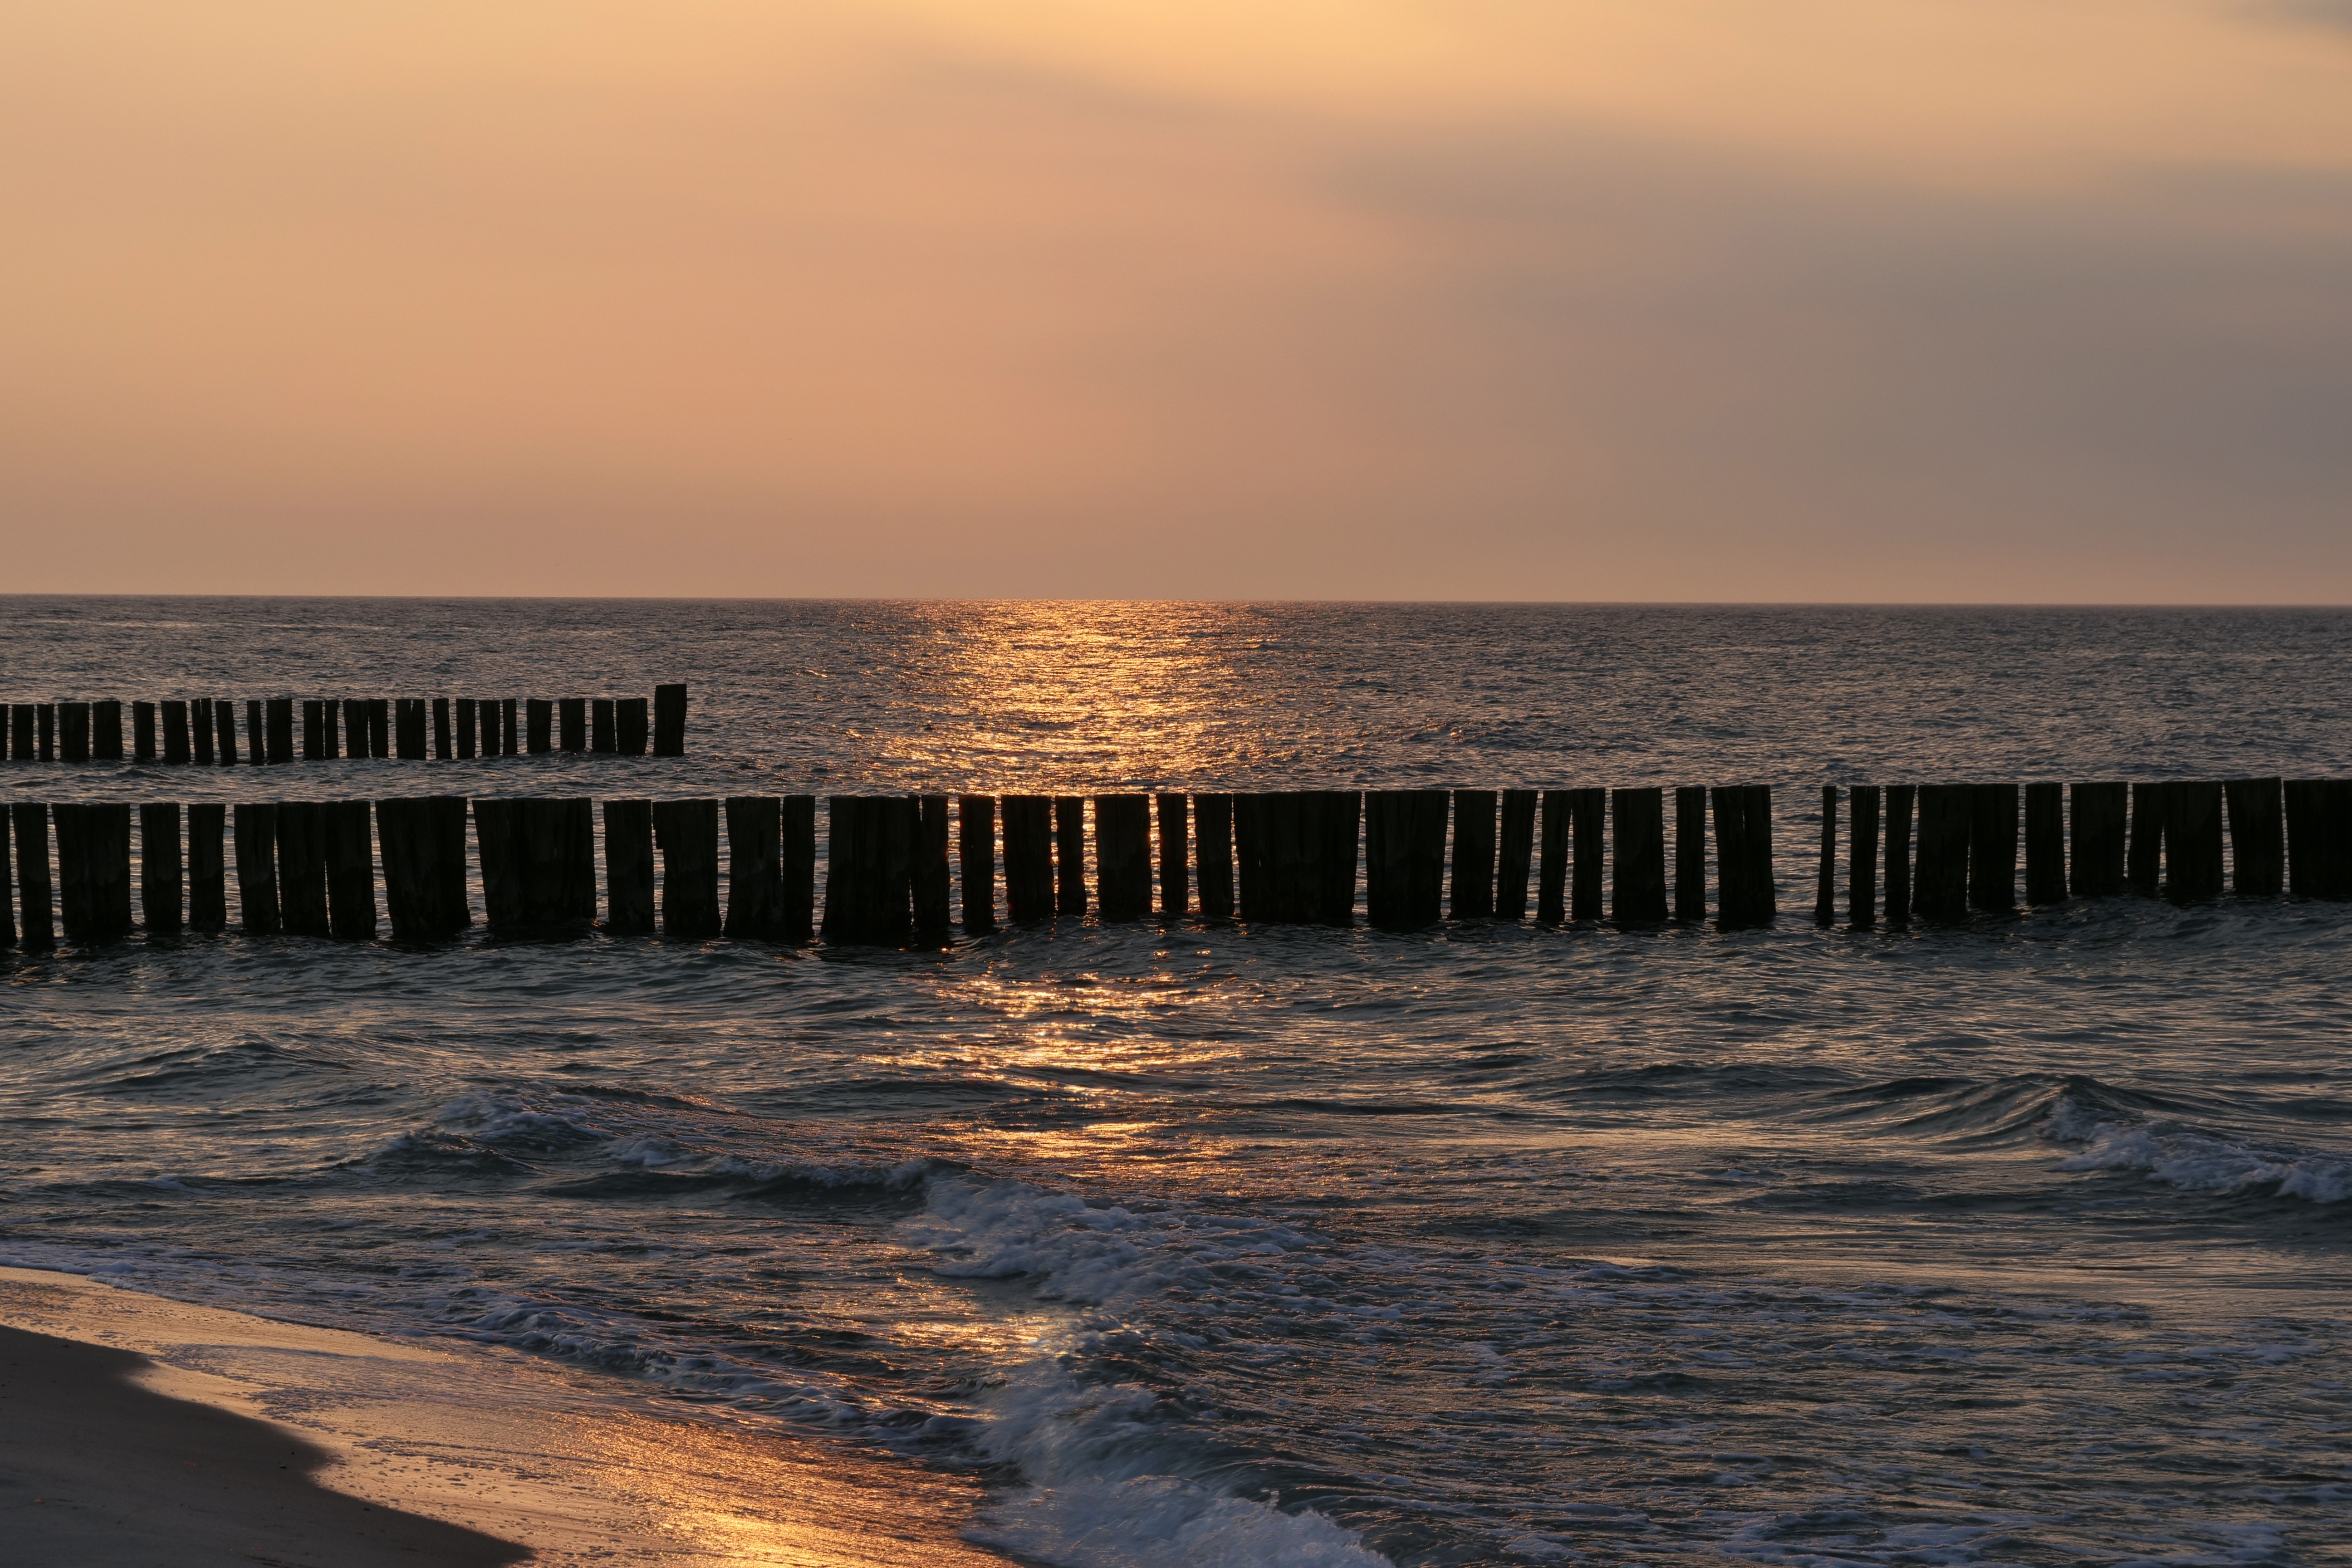 Sunset dusk on the pier and water image - Free stock photo - Public ...